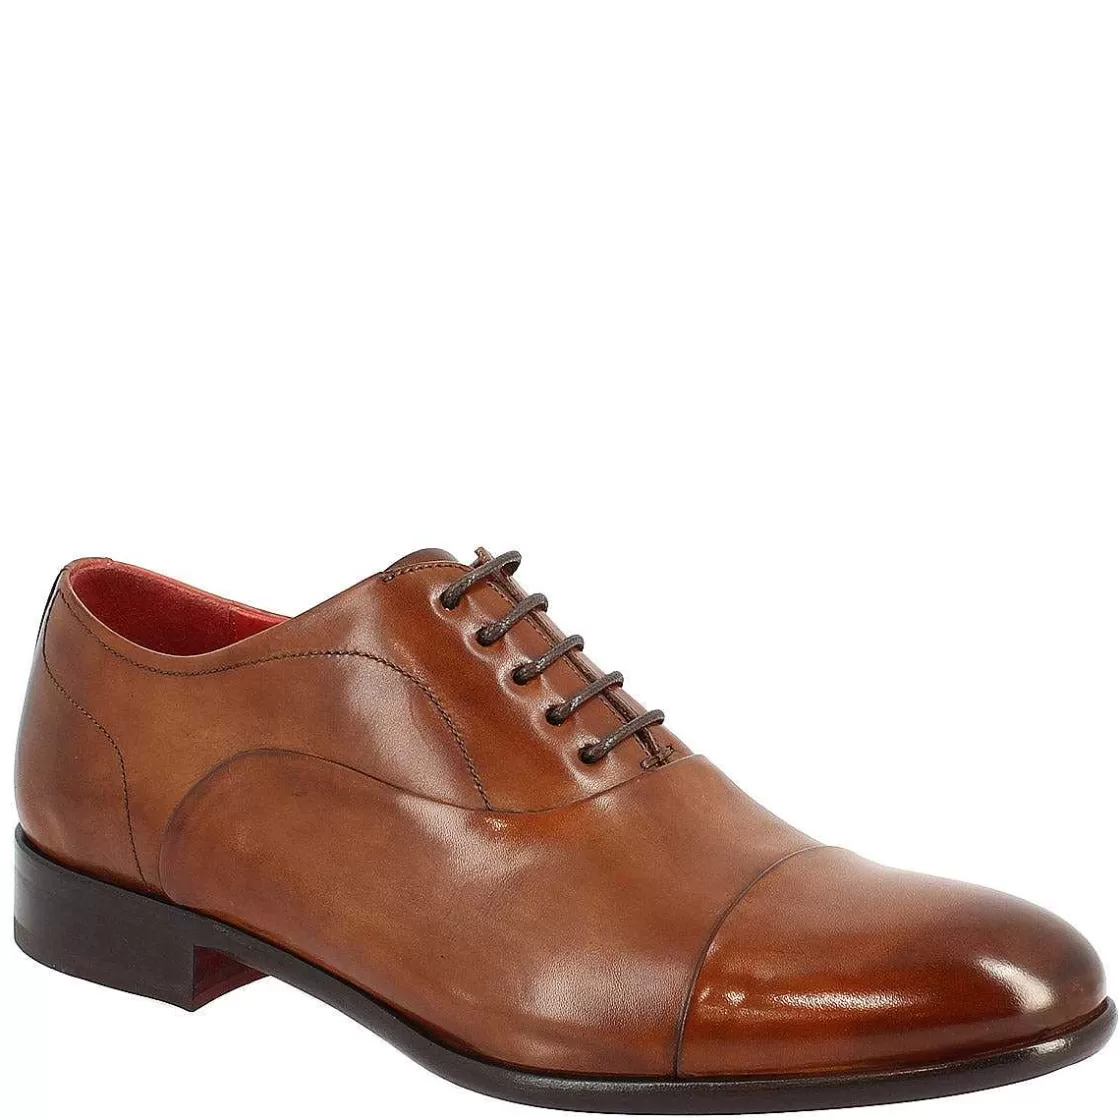 Leonardo Men'S Lace-Up Shoes Handmade In Brandy Leather Outlet